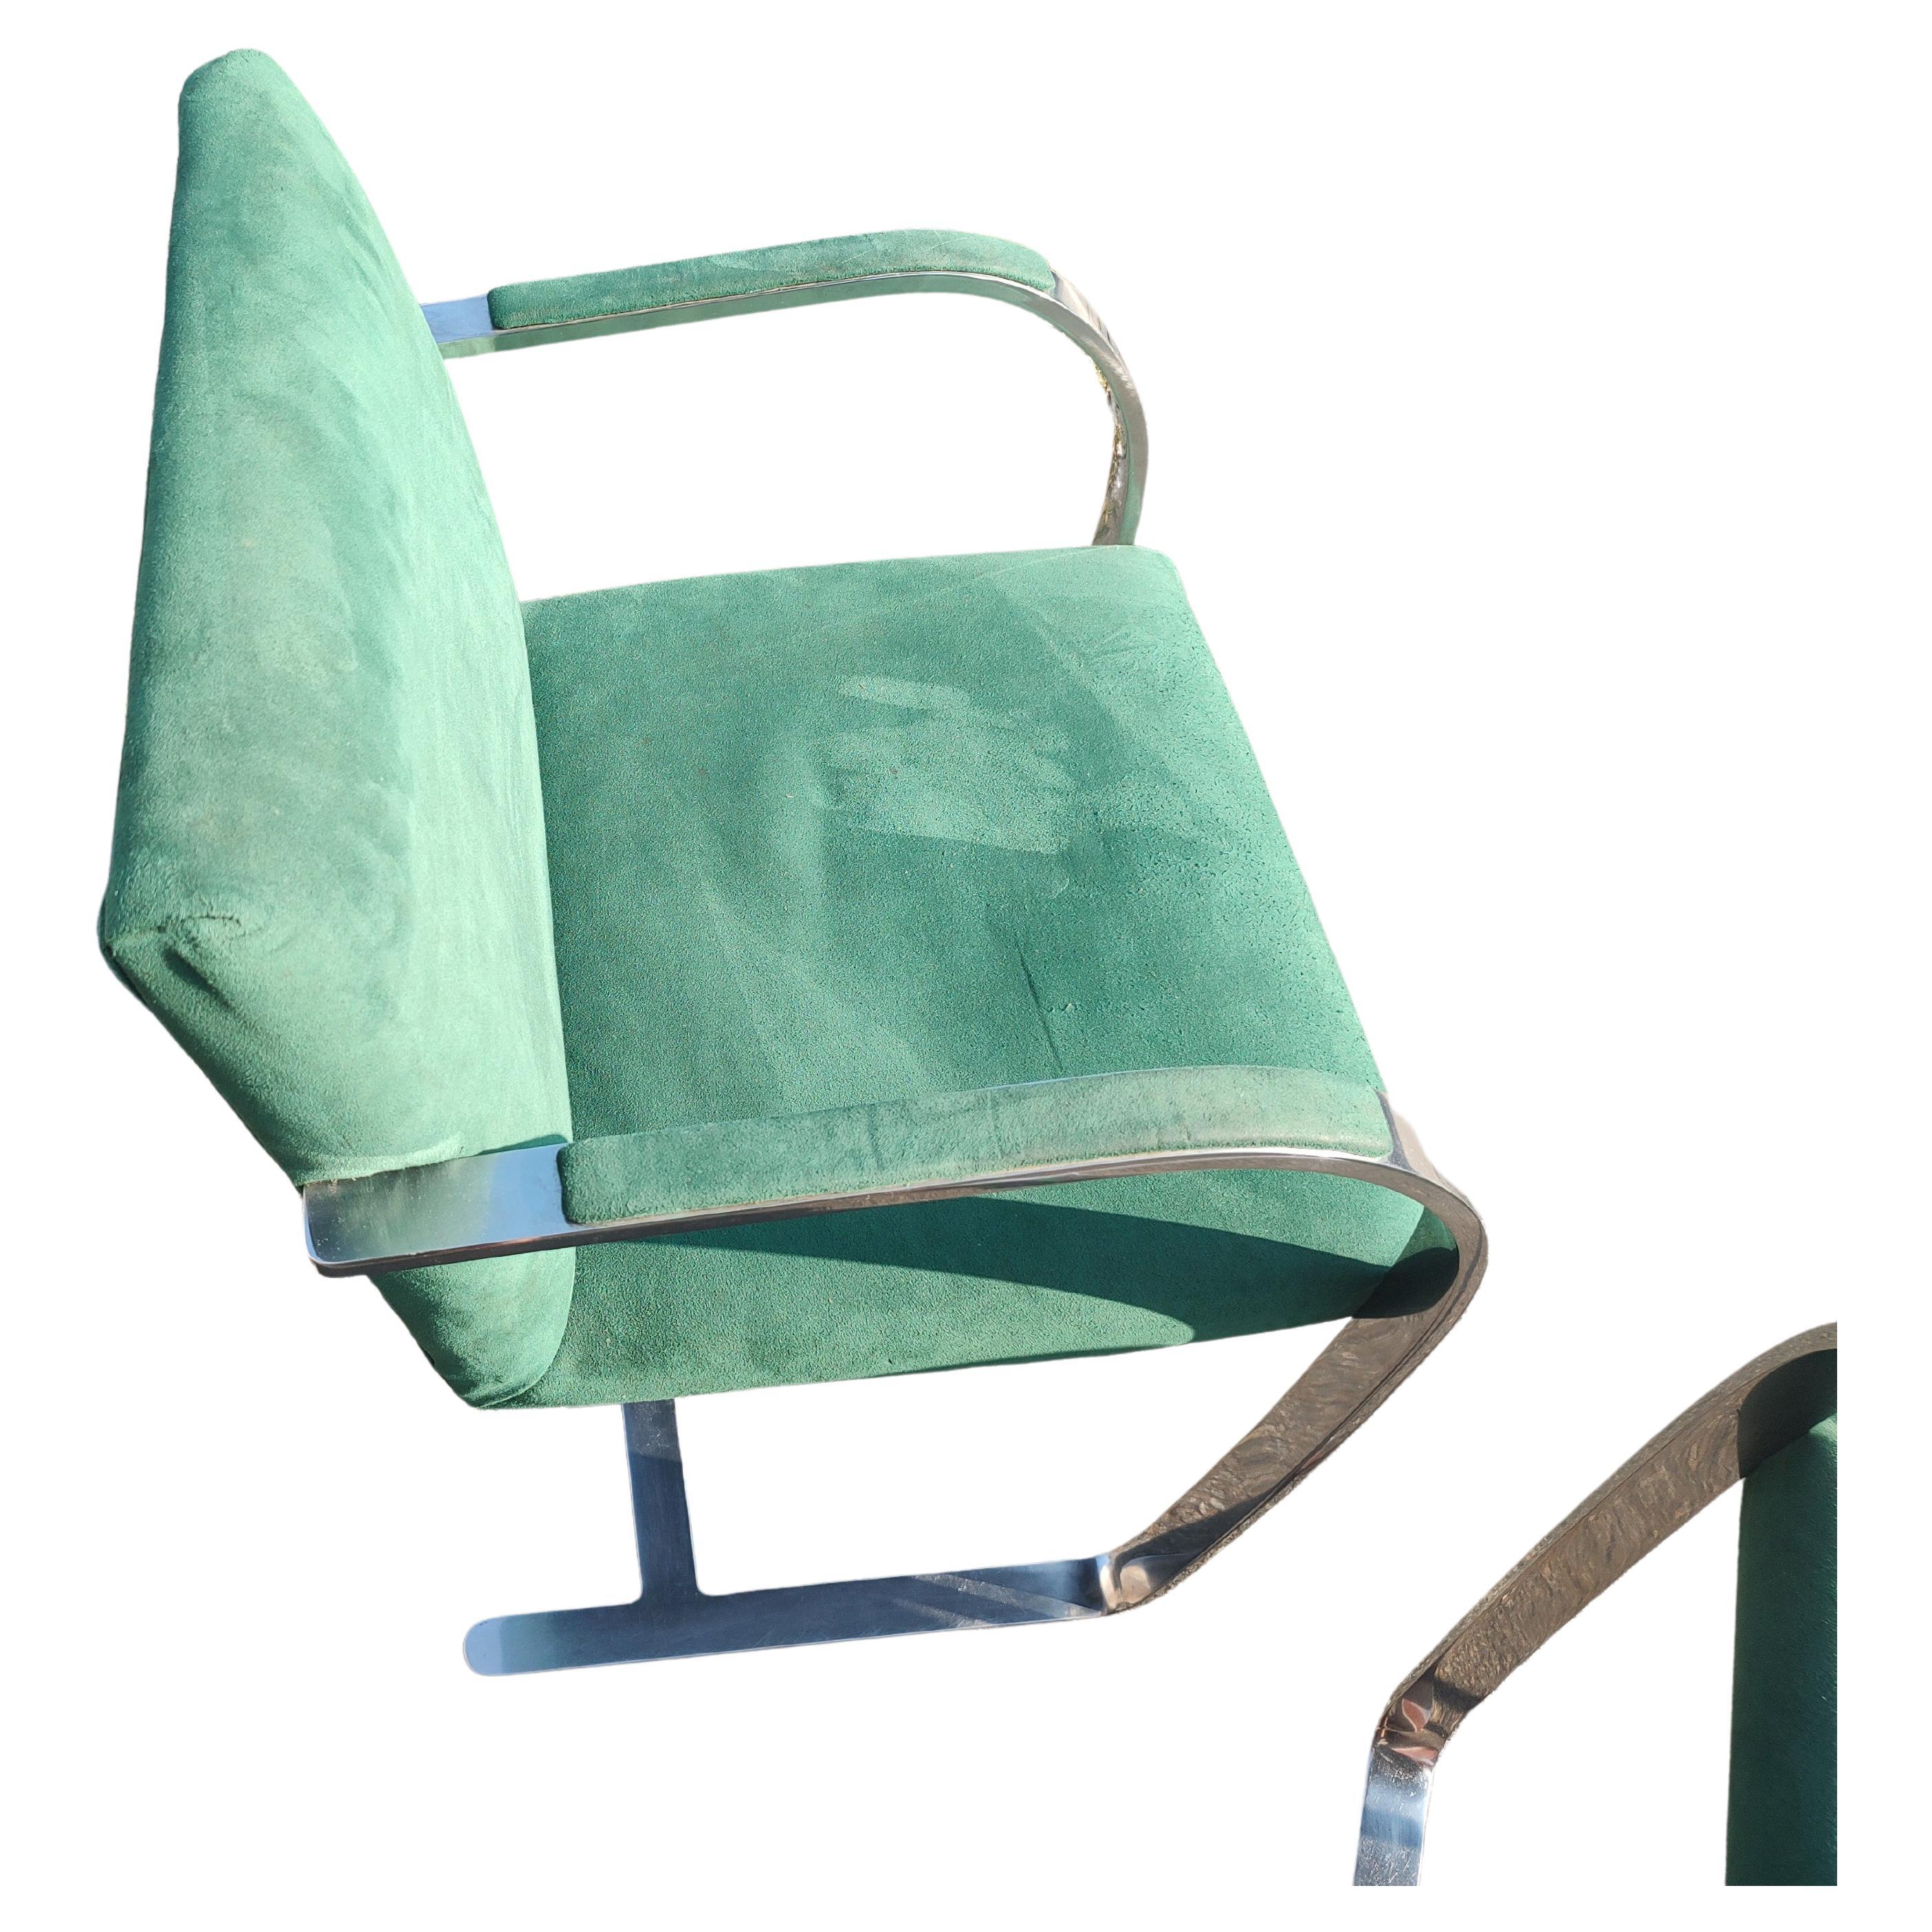 Hand-Crafted Pair of Mid Century Modern Bauhaus Styled Brno Chairs  Ludwig Mies van DerRohe  For Sale